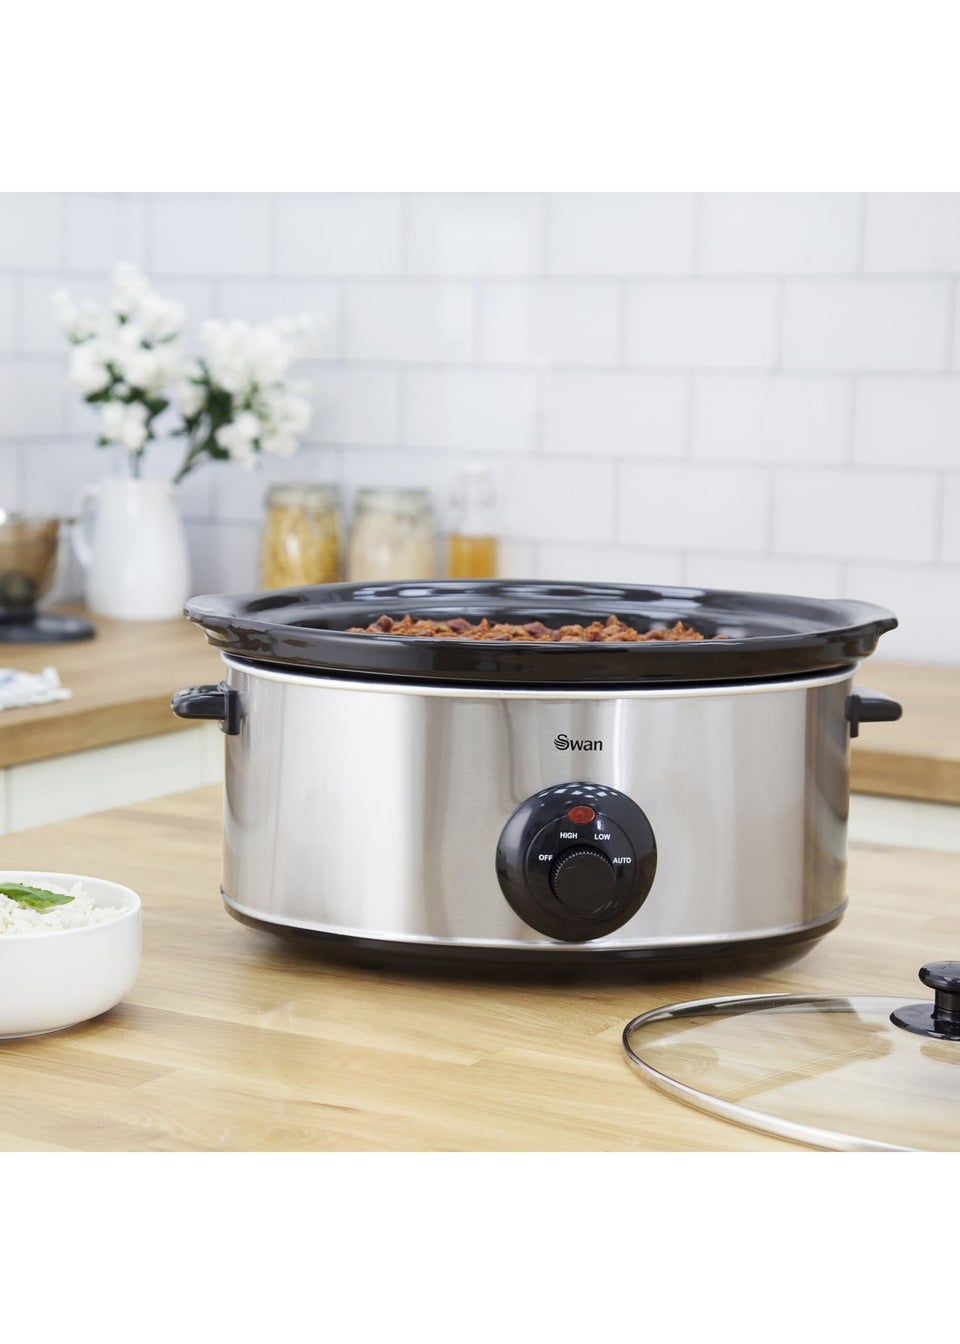 Swan Stainless Steel Slow Cooker (6.5L)